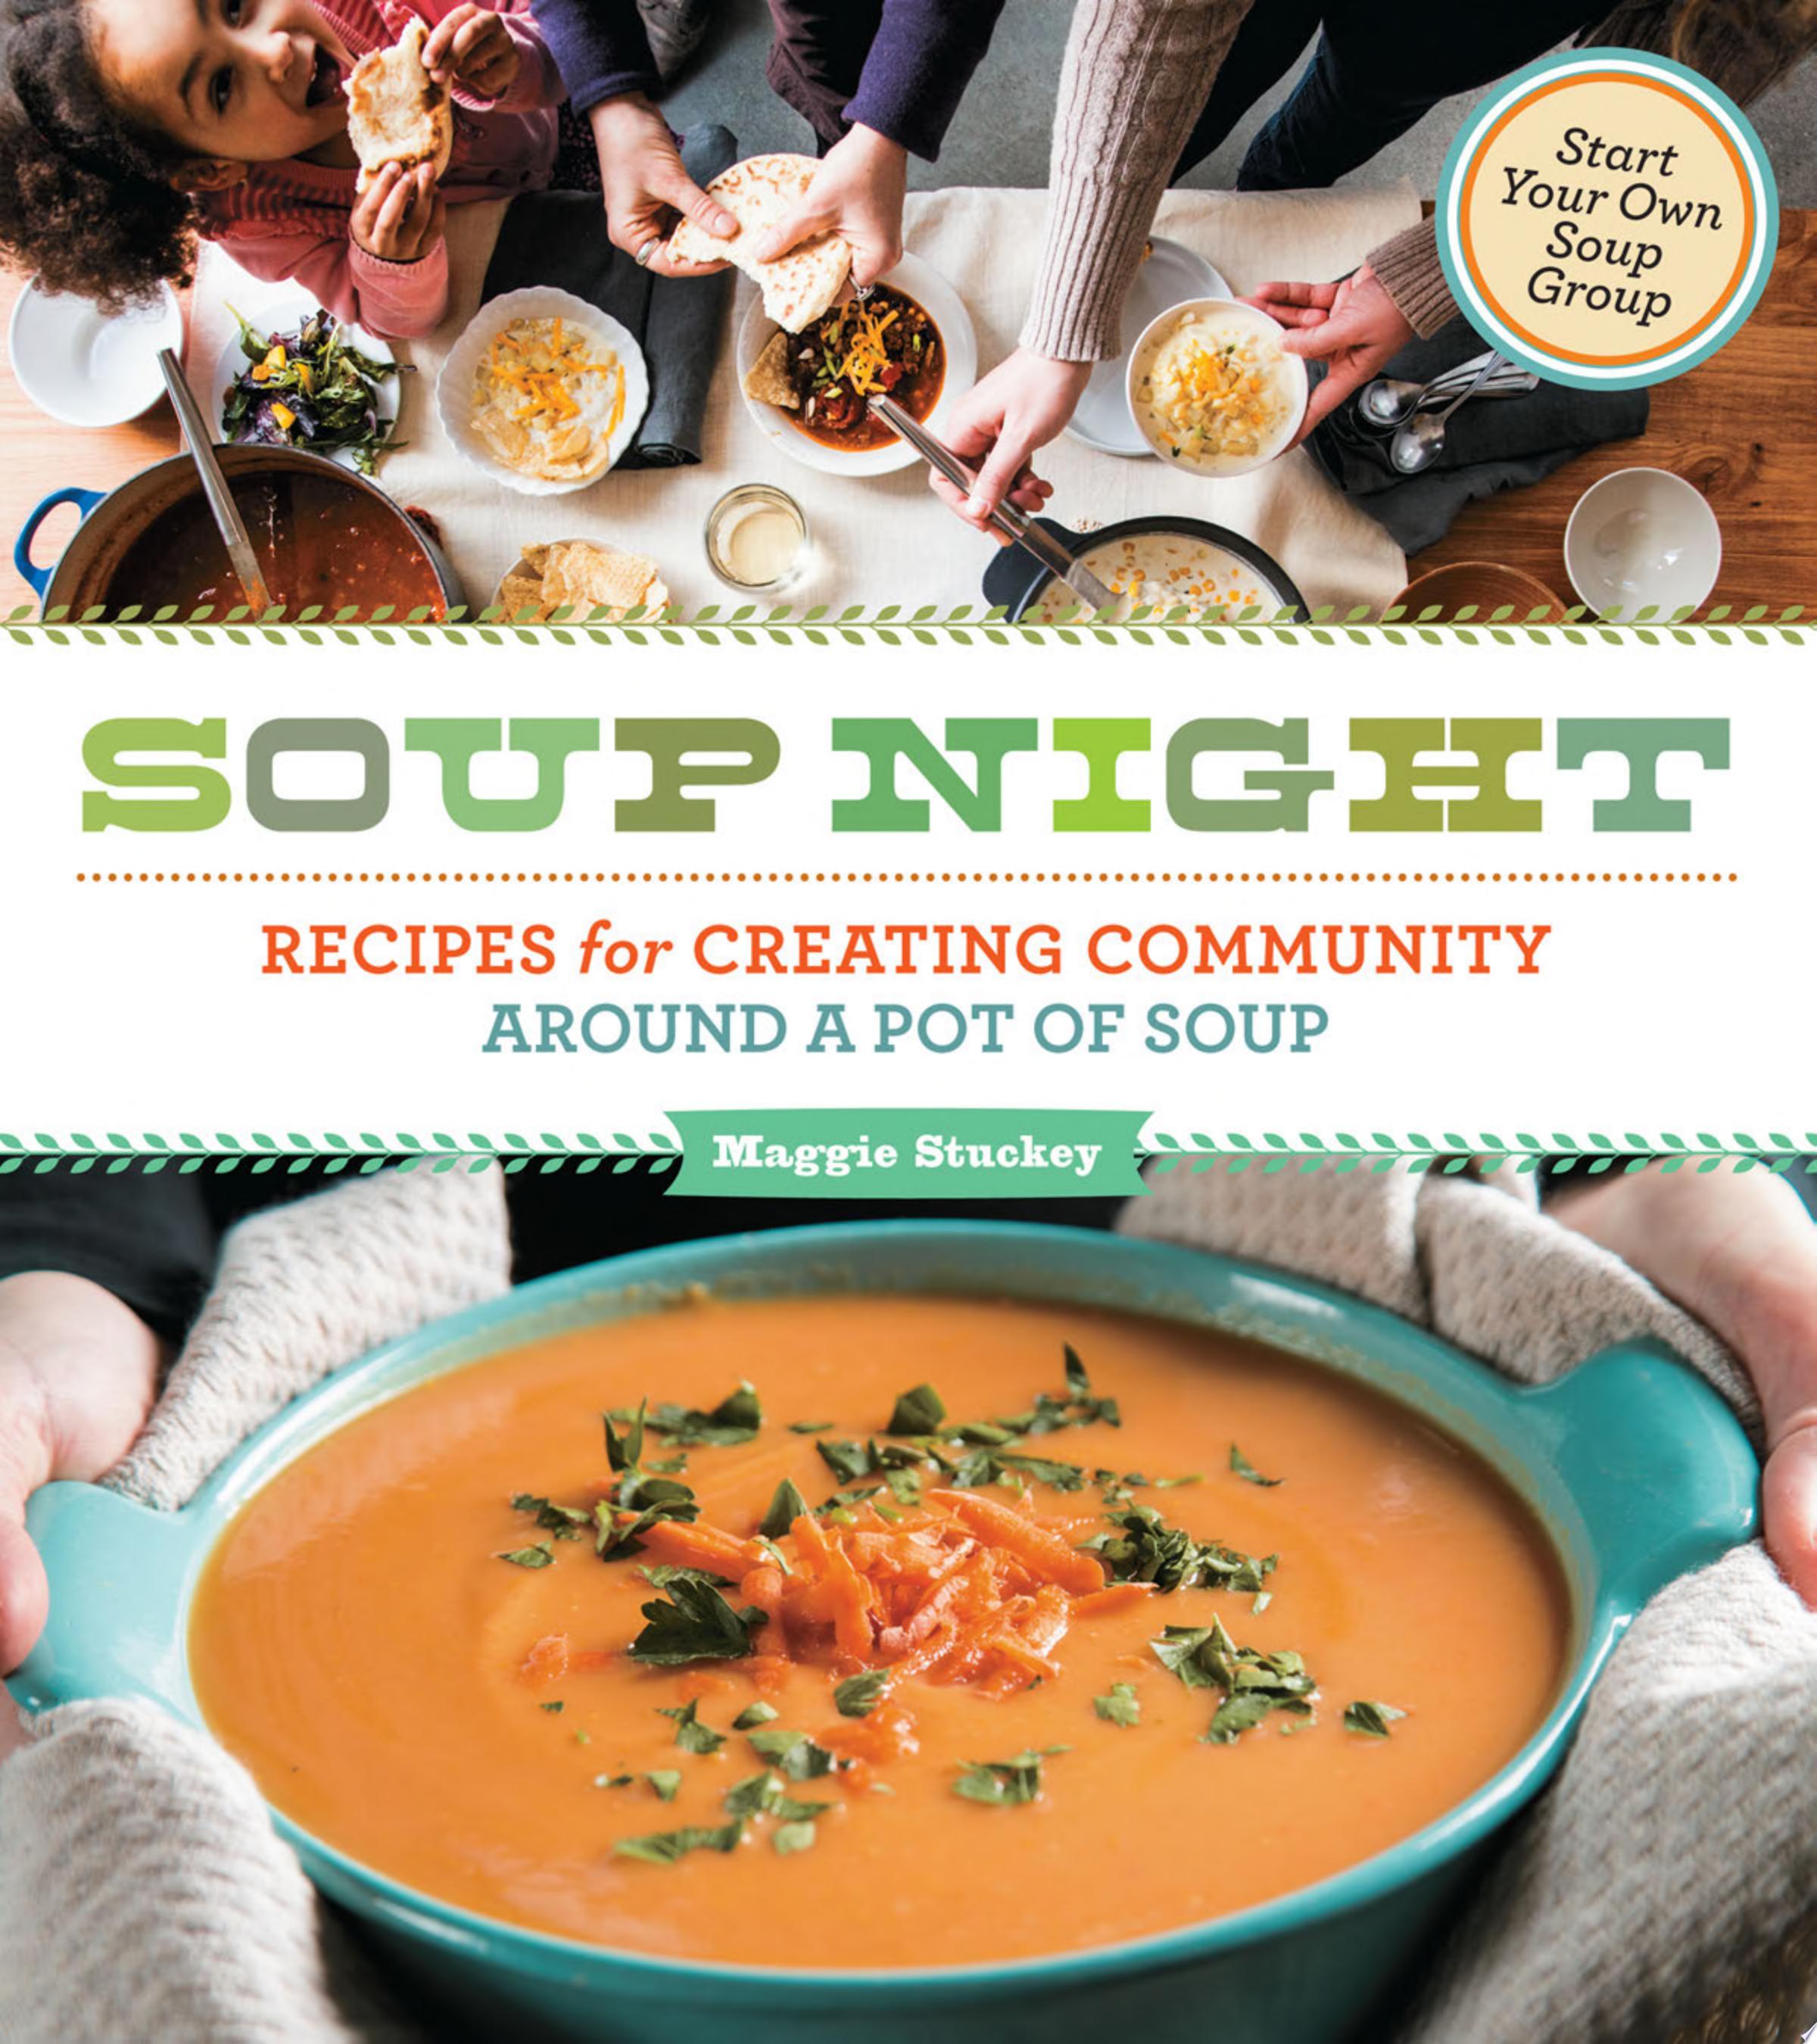 Image for "Soup Night"